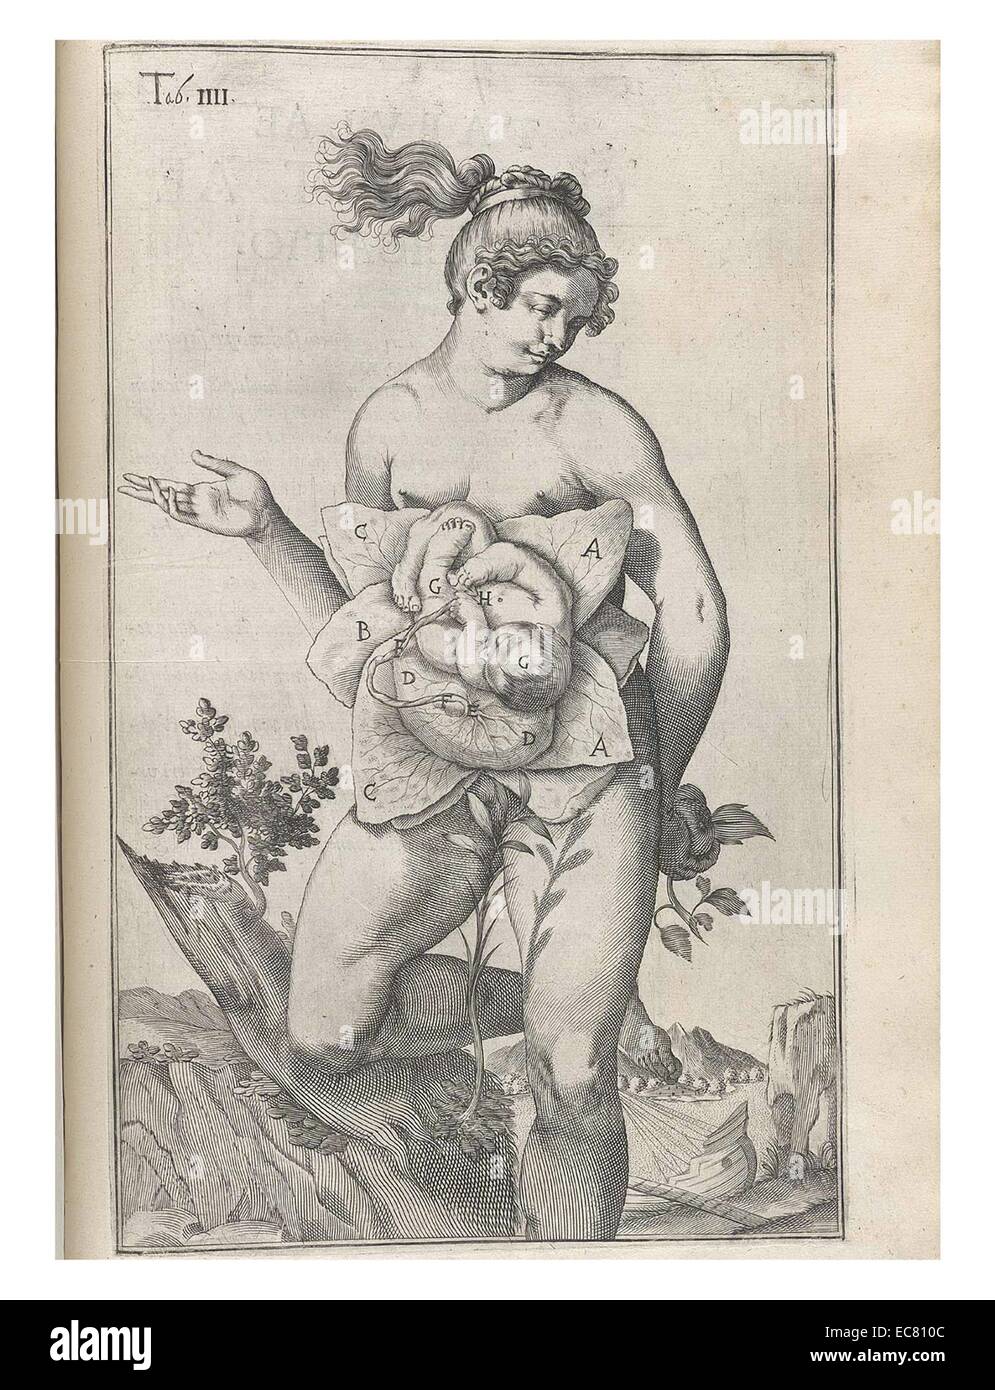 Anatomical drawing of a female body by Adriaan van den Spiegel (1578-1625). Spiegel was a Flemish anatomist who was born in Brussels and practiced medicine in Padua. He is known as one of the greatest physicians associated with the city. Stock Photo